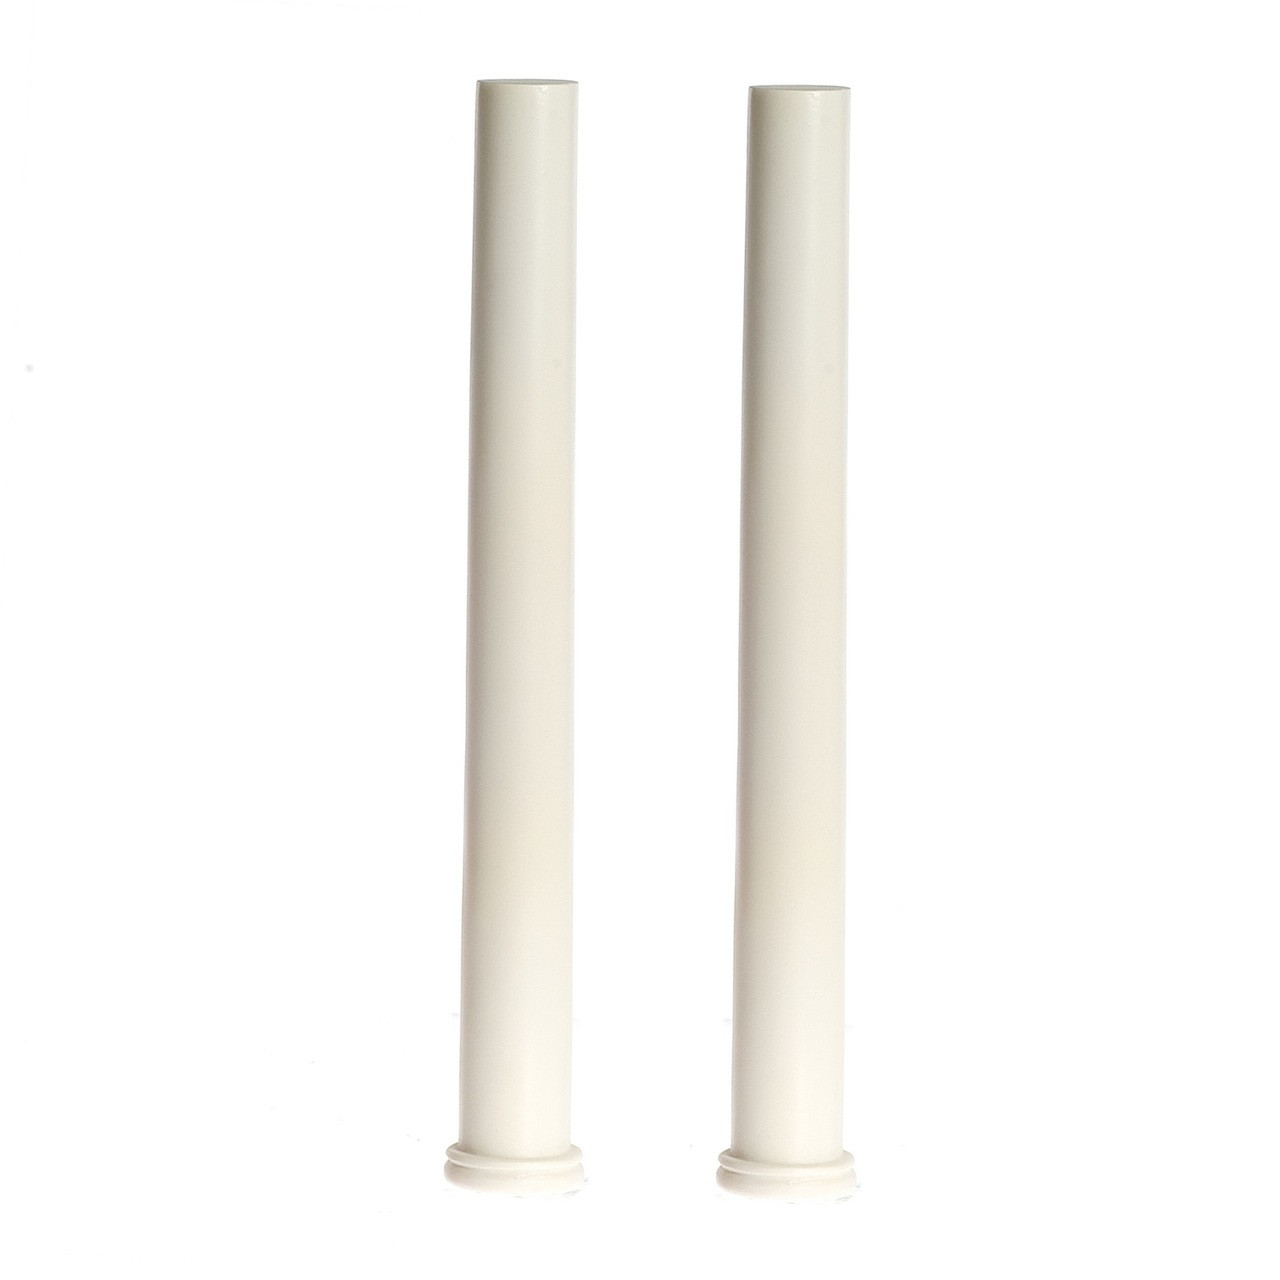 Pair of round tapered one-inch scale dollhouse columns